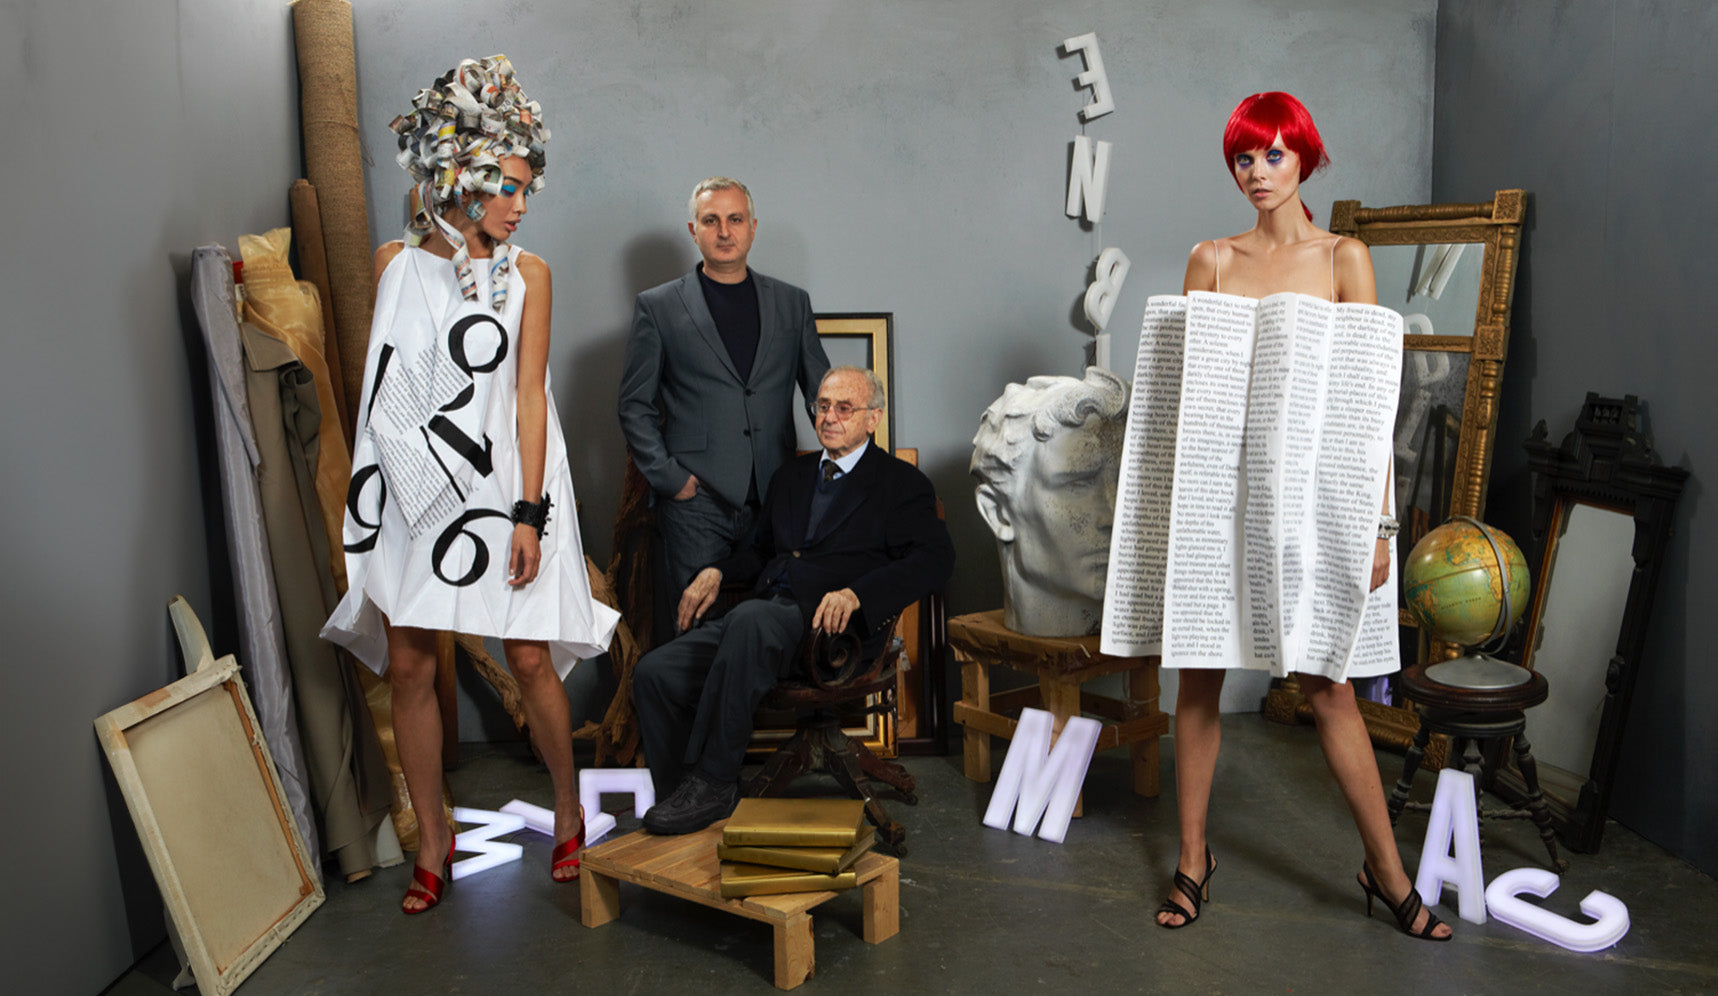 Father and son George and Leon Kalajian posing with 2 models wearing pleated looks 